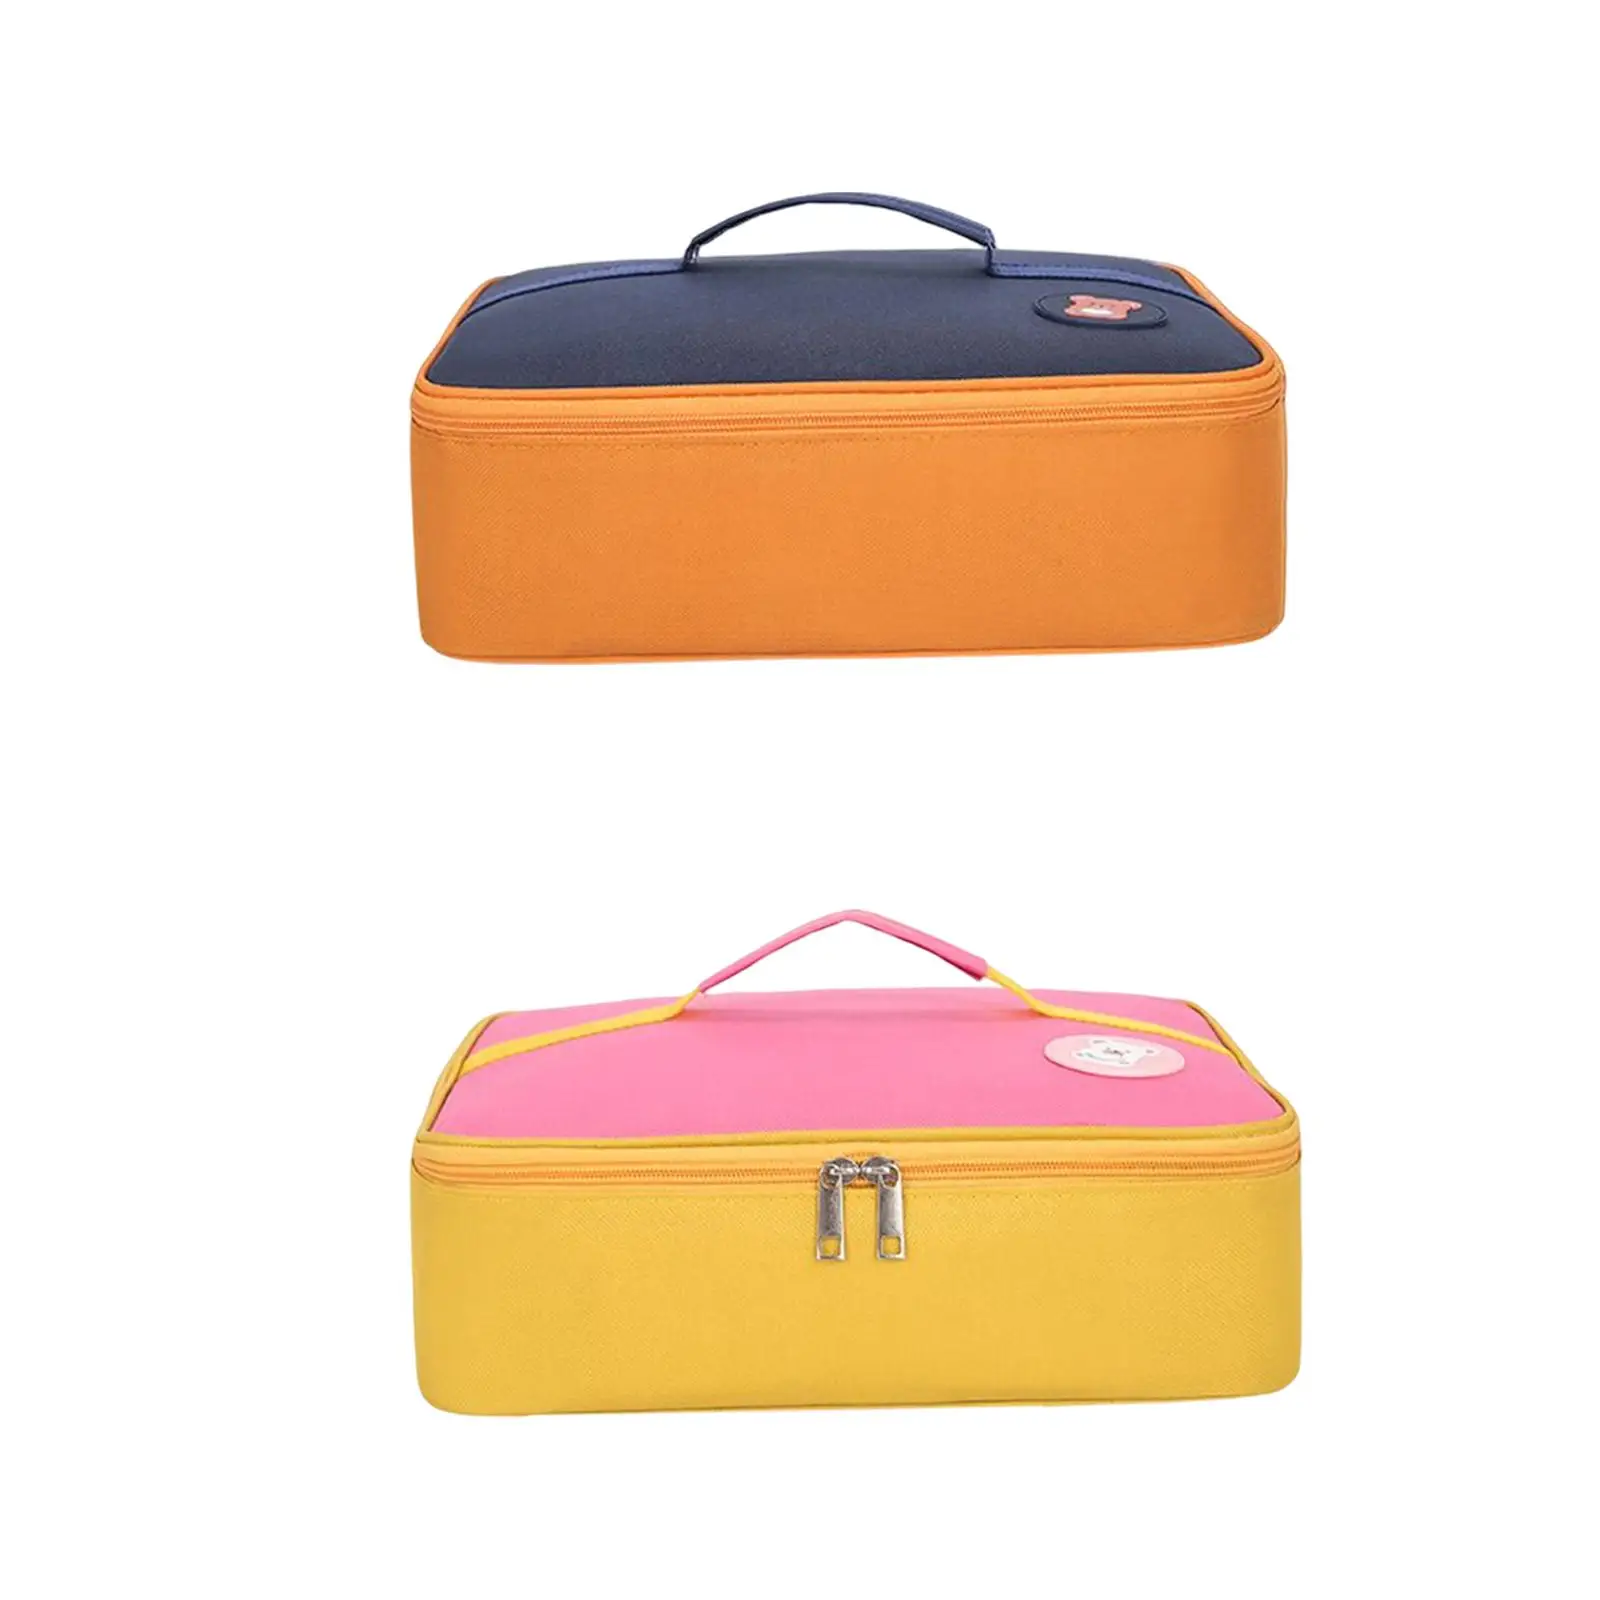 Portable  Thermal Insulated Cooler Bag Exquisite Sewing Smooth Zipper  Food Containers Universal Size Durable